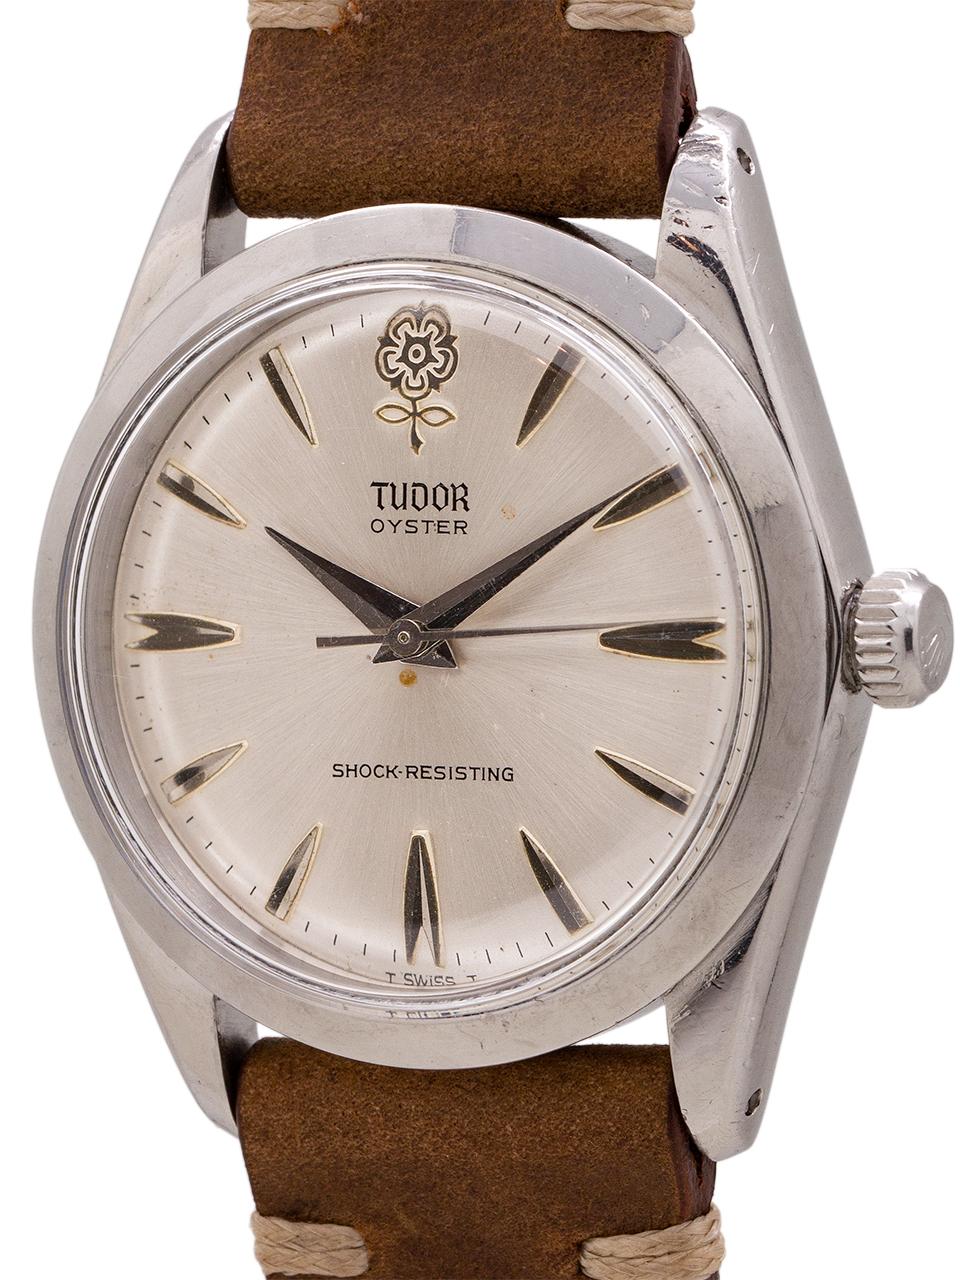 
Tudor stainless steel Oyster manual wind ref 7984 circa 1965. Featuring a 34mm diameter Oyster case with smooth bezel and Rolex screw down crown. Featuring a very pleasing original matte silver dial with oversized raised silver spear shaped